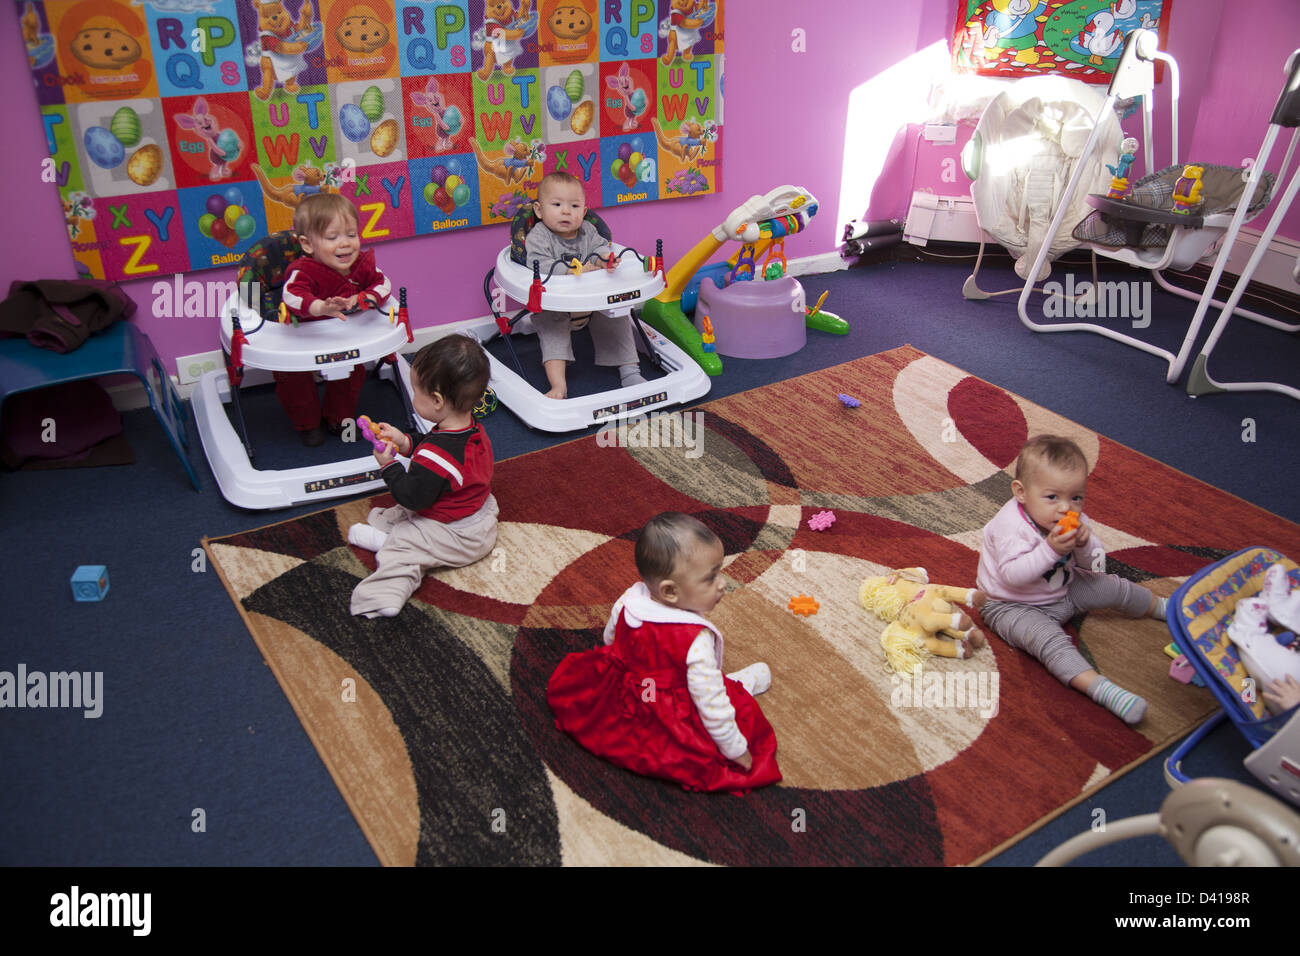 Smart Kids Are Us, a multicultural nursery school and early learning center in Brooklyn, NY. Stock Photo